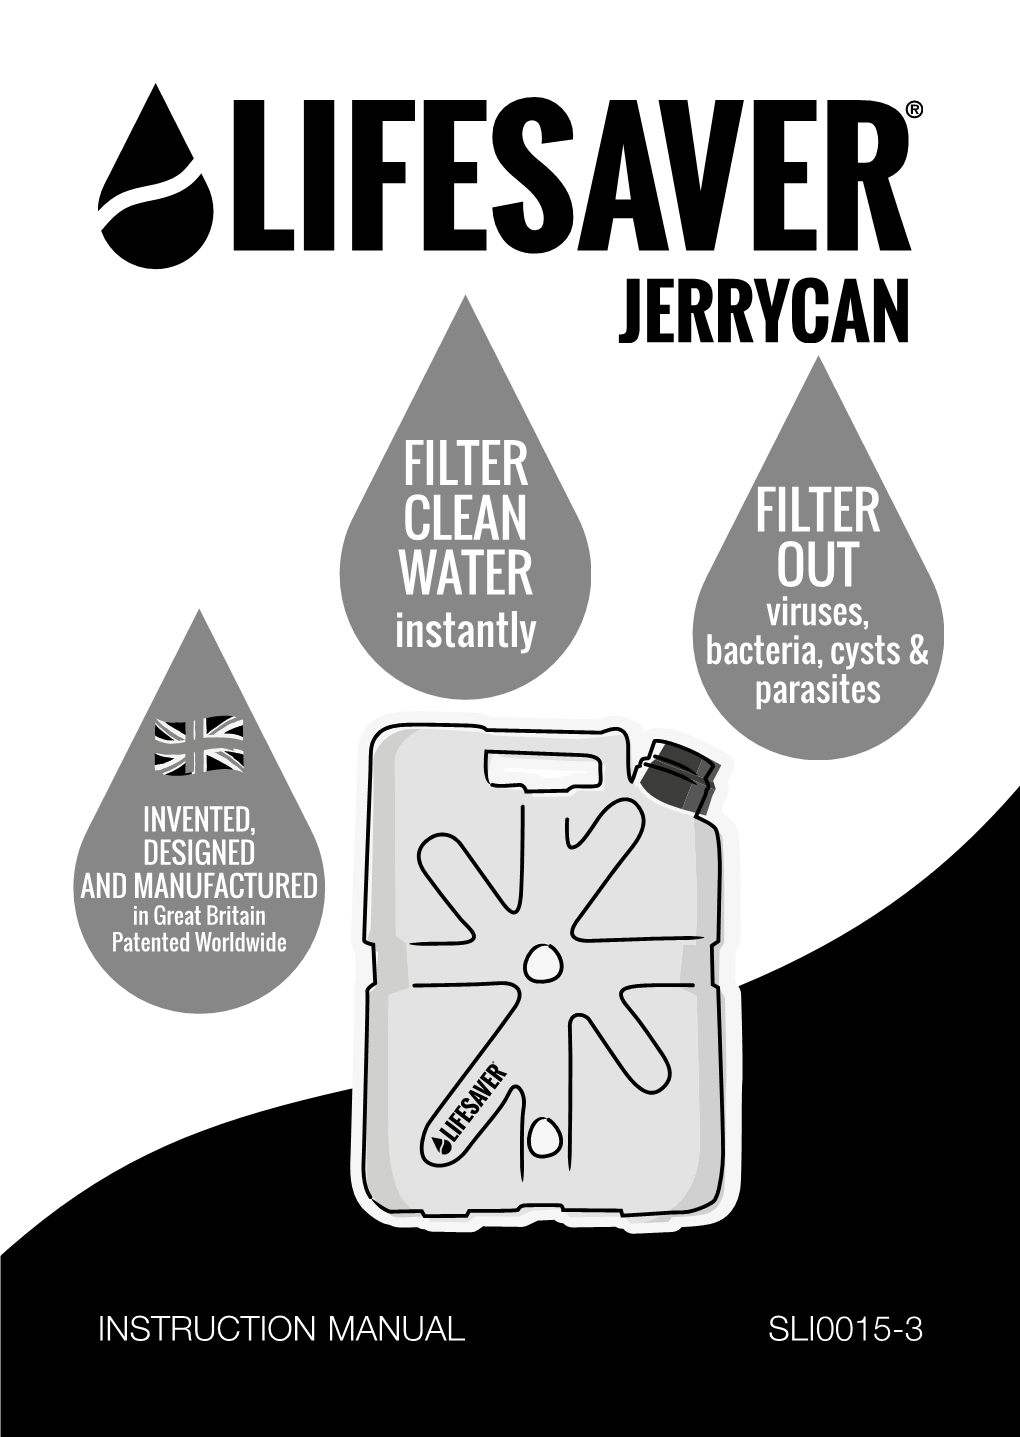 Filter Clean Water Filter